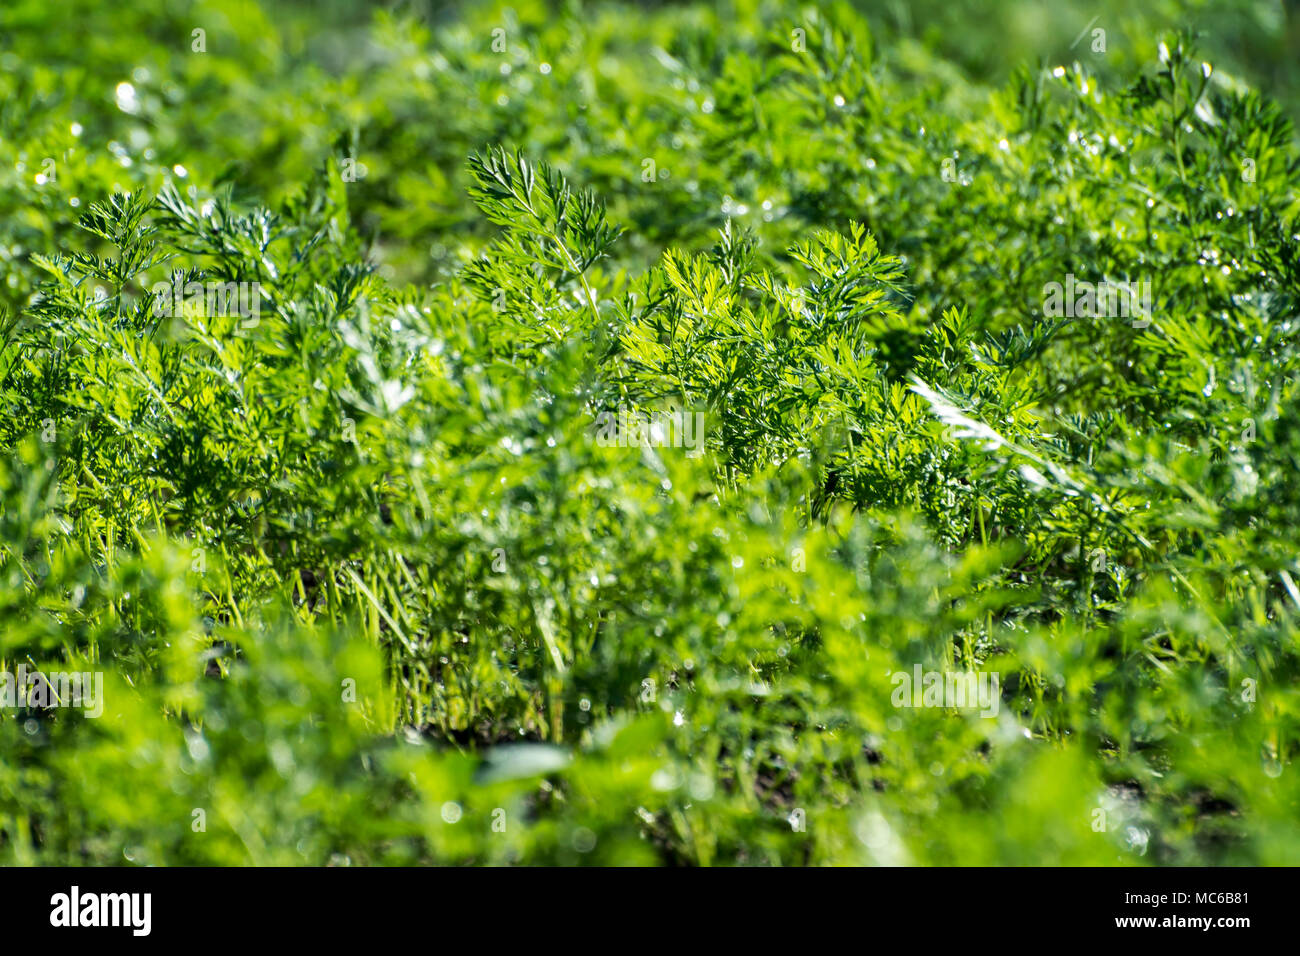 Carrot Cultivation Stock Photos Carrot Cultivation Stock Images